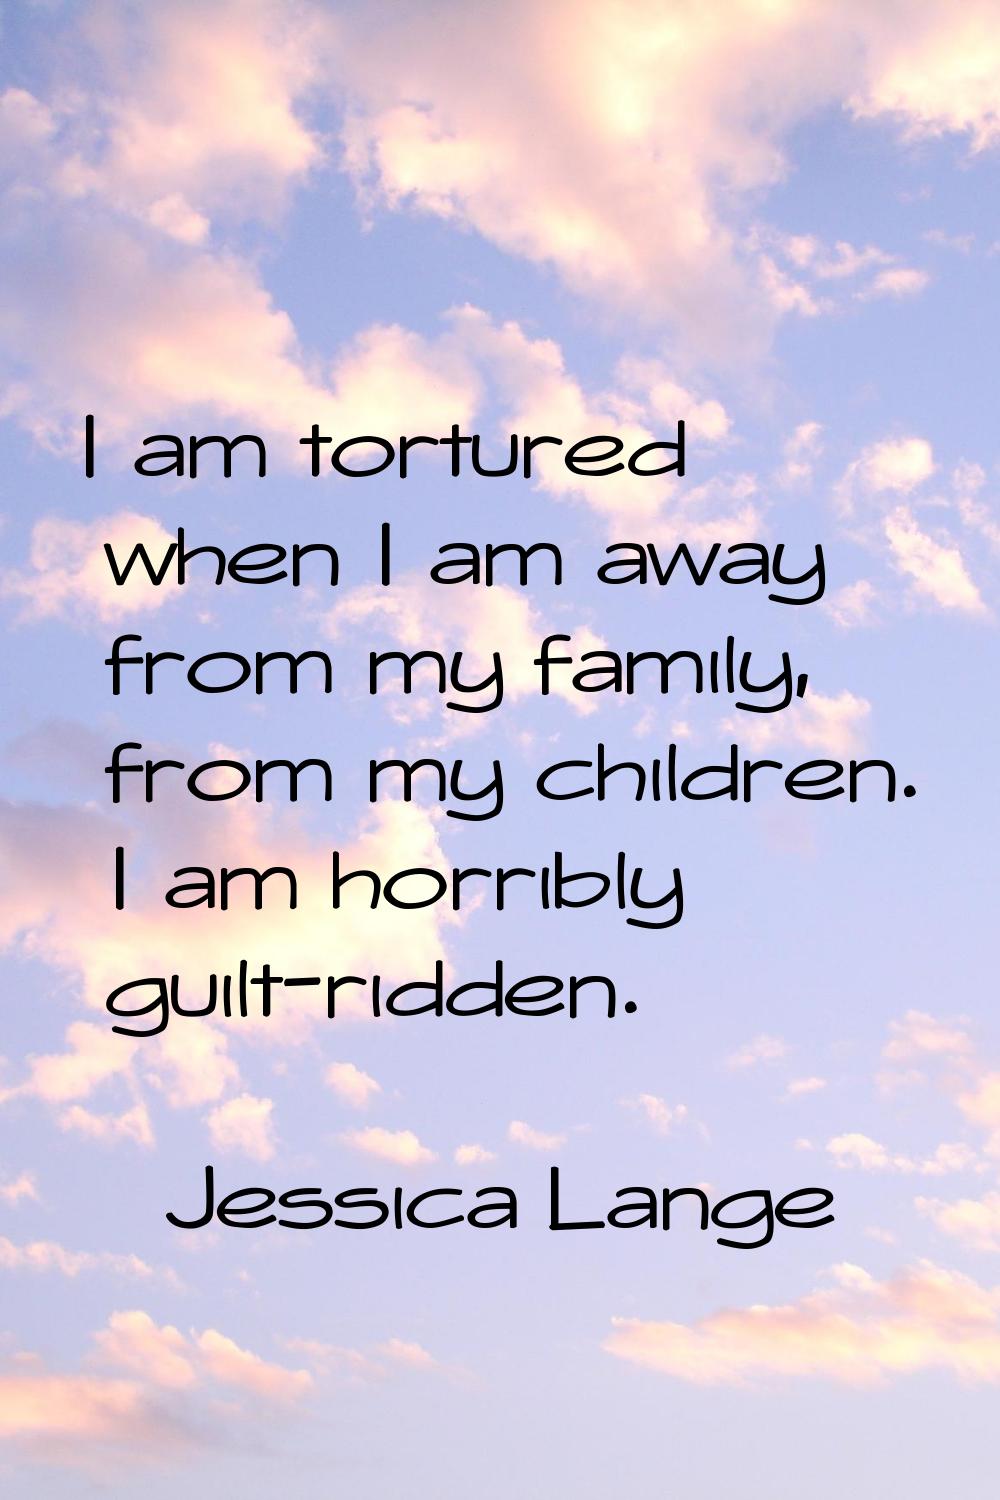 I am tortured when I am away from my family, from my children. I am horribly guilt-ridden.